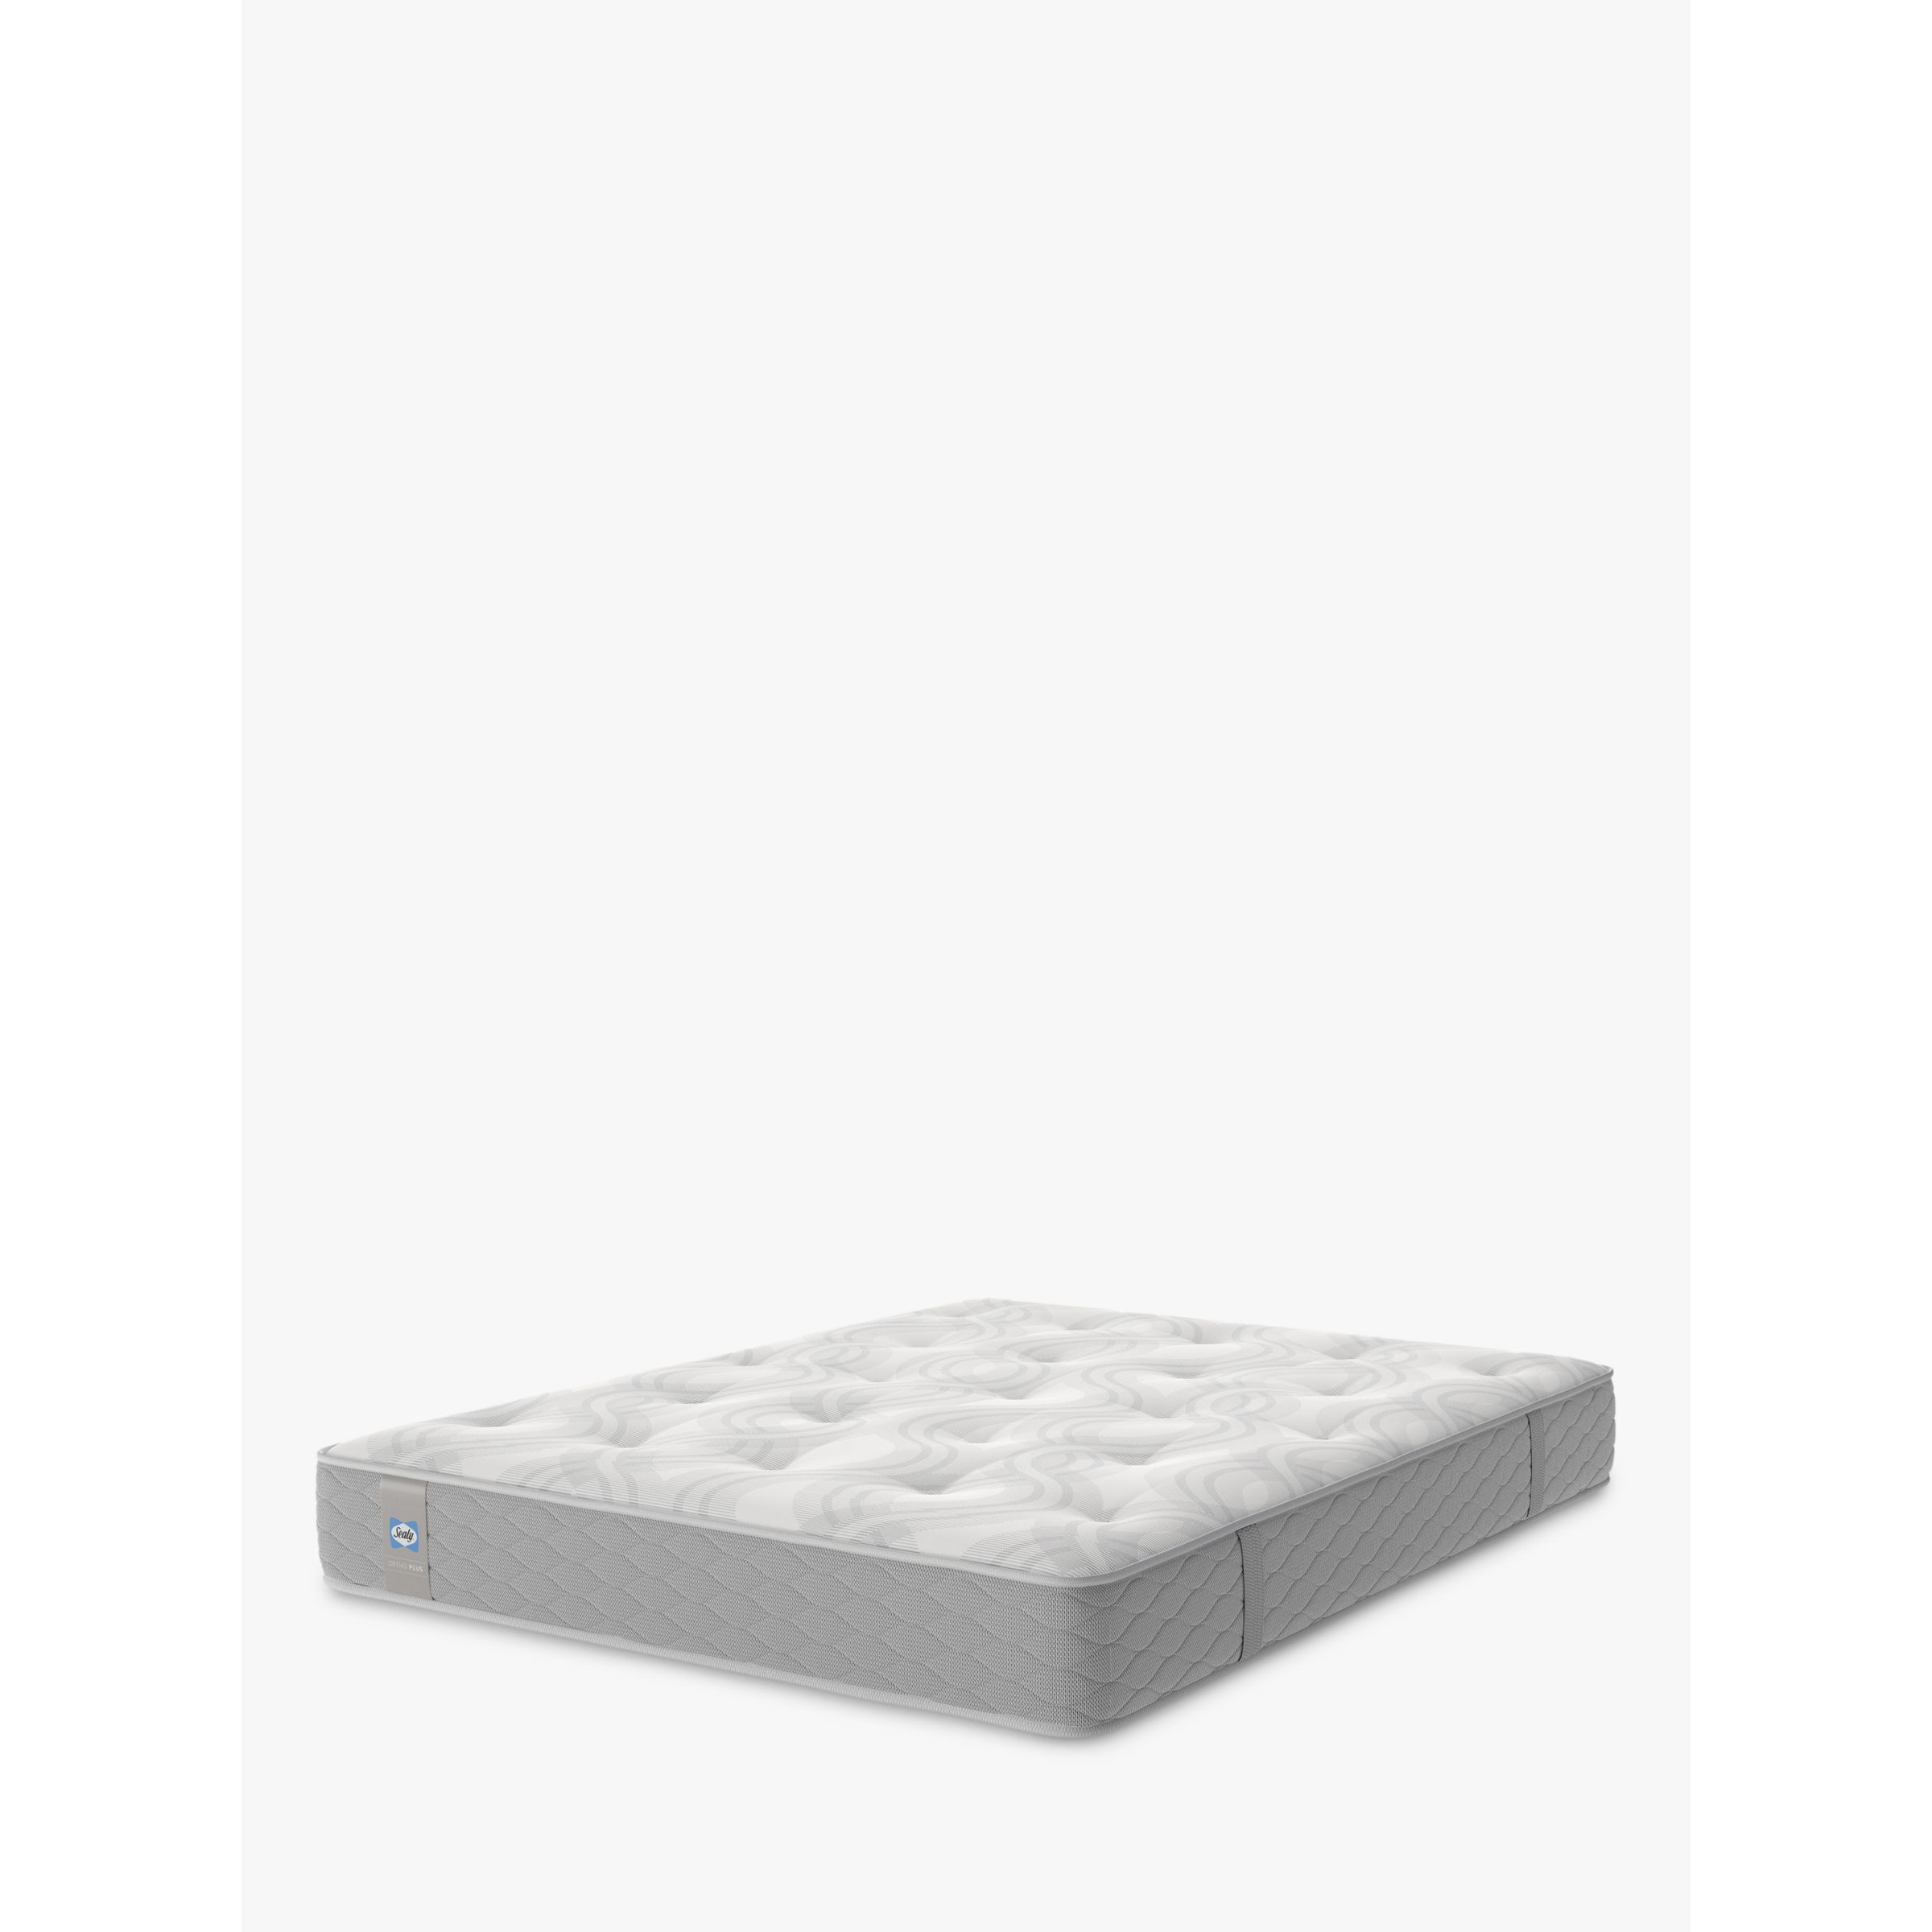 Sealy Ashbourne Ortho Plus Mattress, Extra Firmer Tension, King Size - image 1